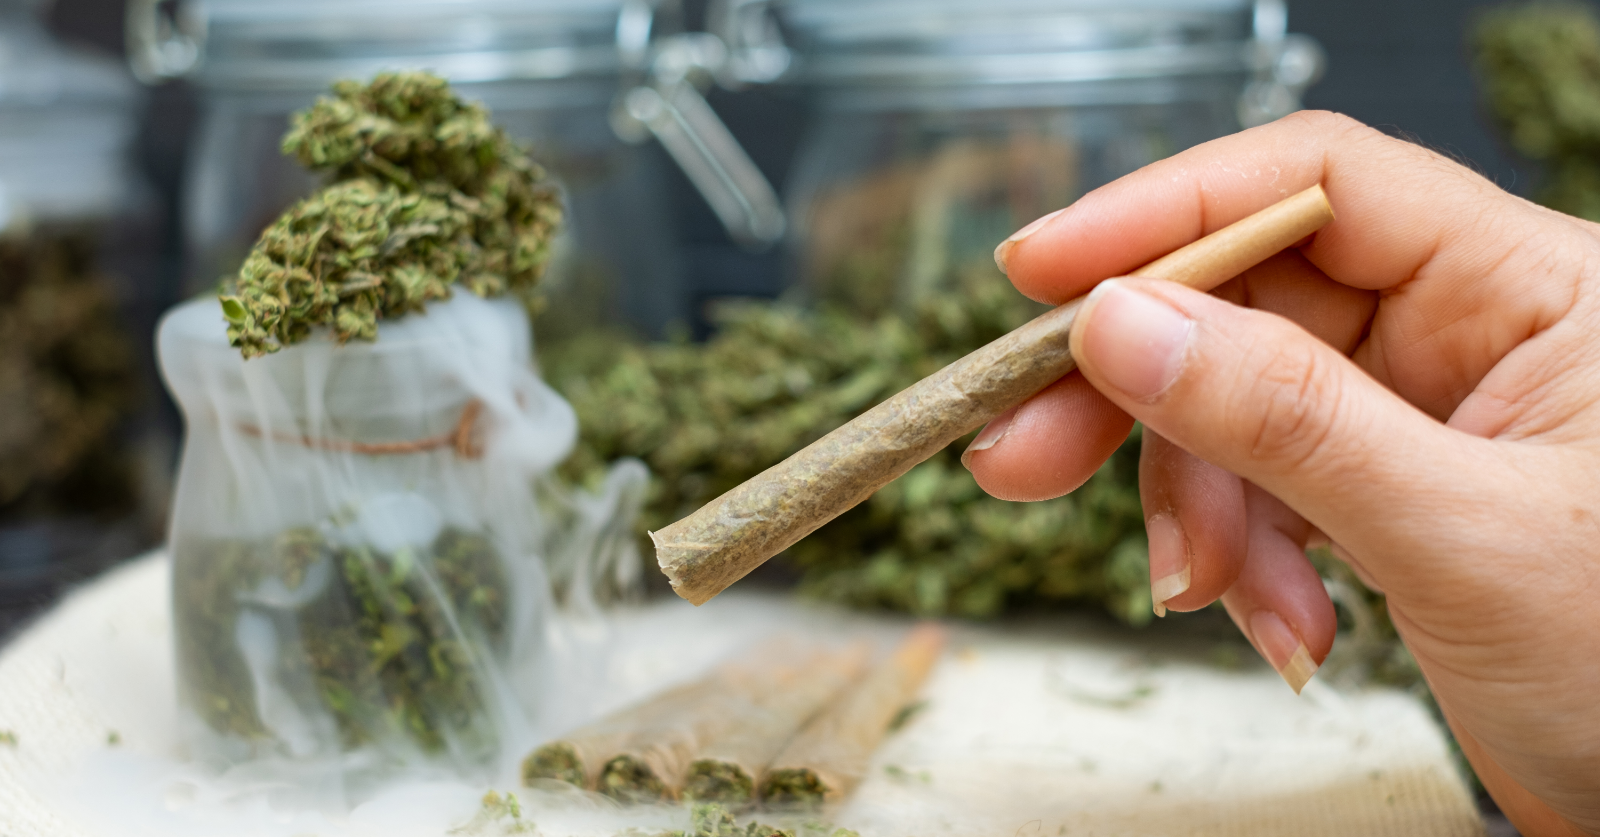 Americans incorrectly assume marijuana smoke is safer than tobacco, according to new study